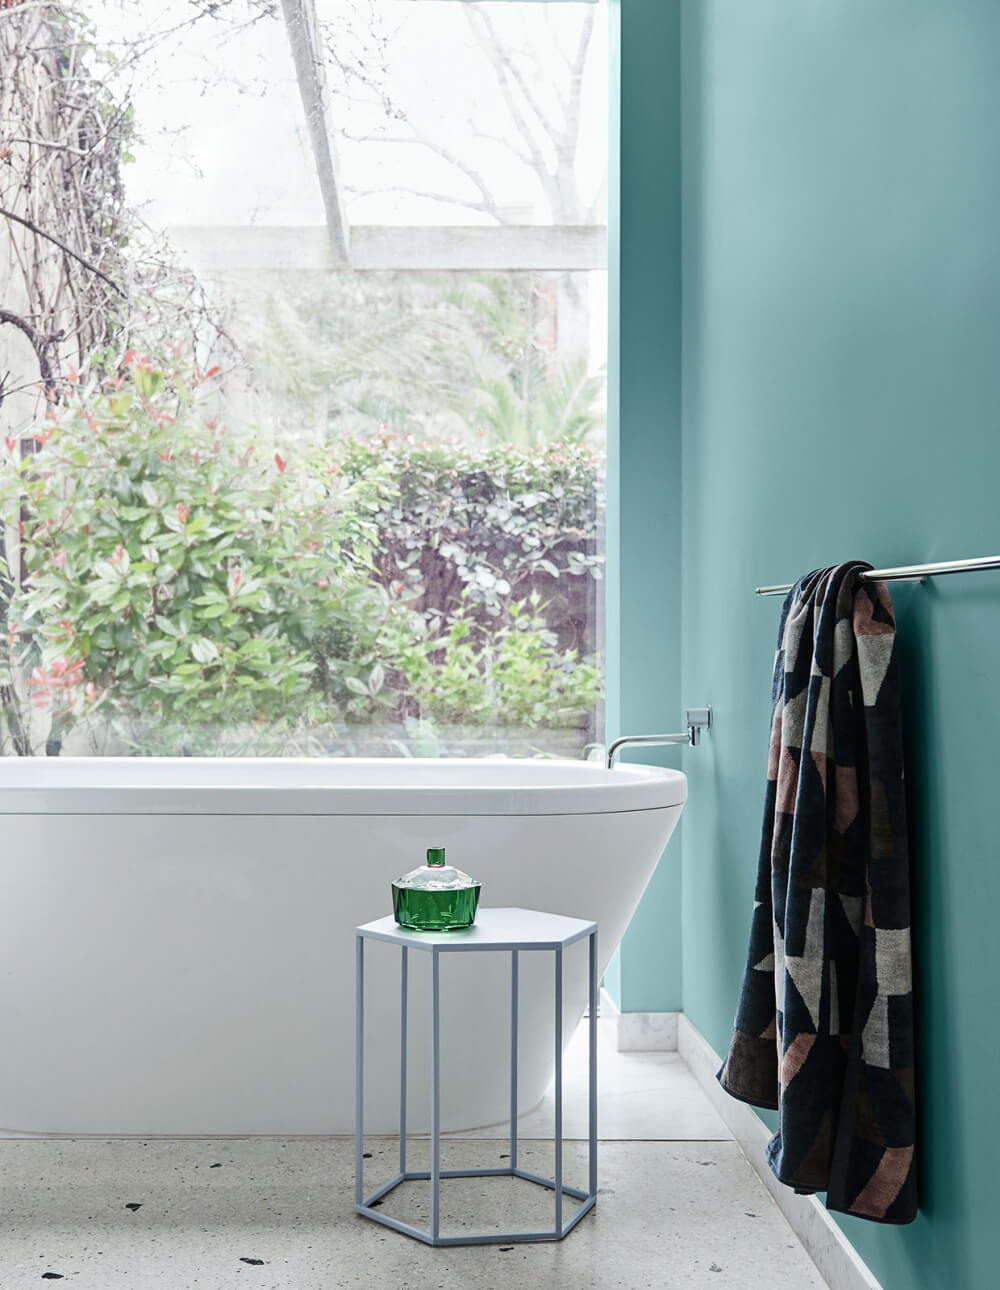 TheNordroom DuluxColorForecast2020 5 The Color Trends For 2020 Are Inspired by Nature